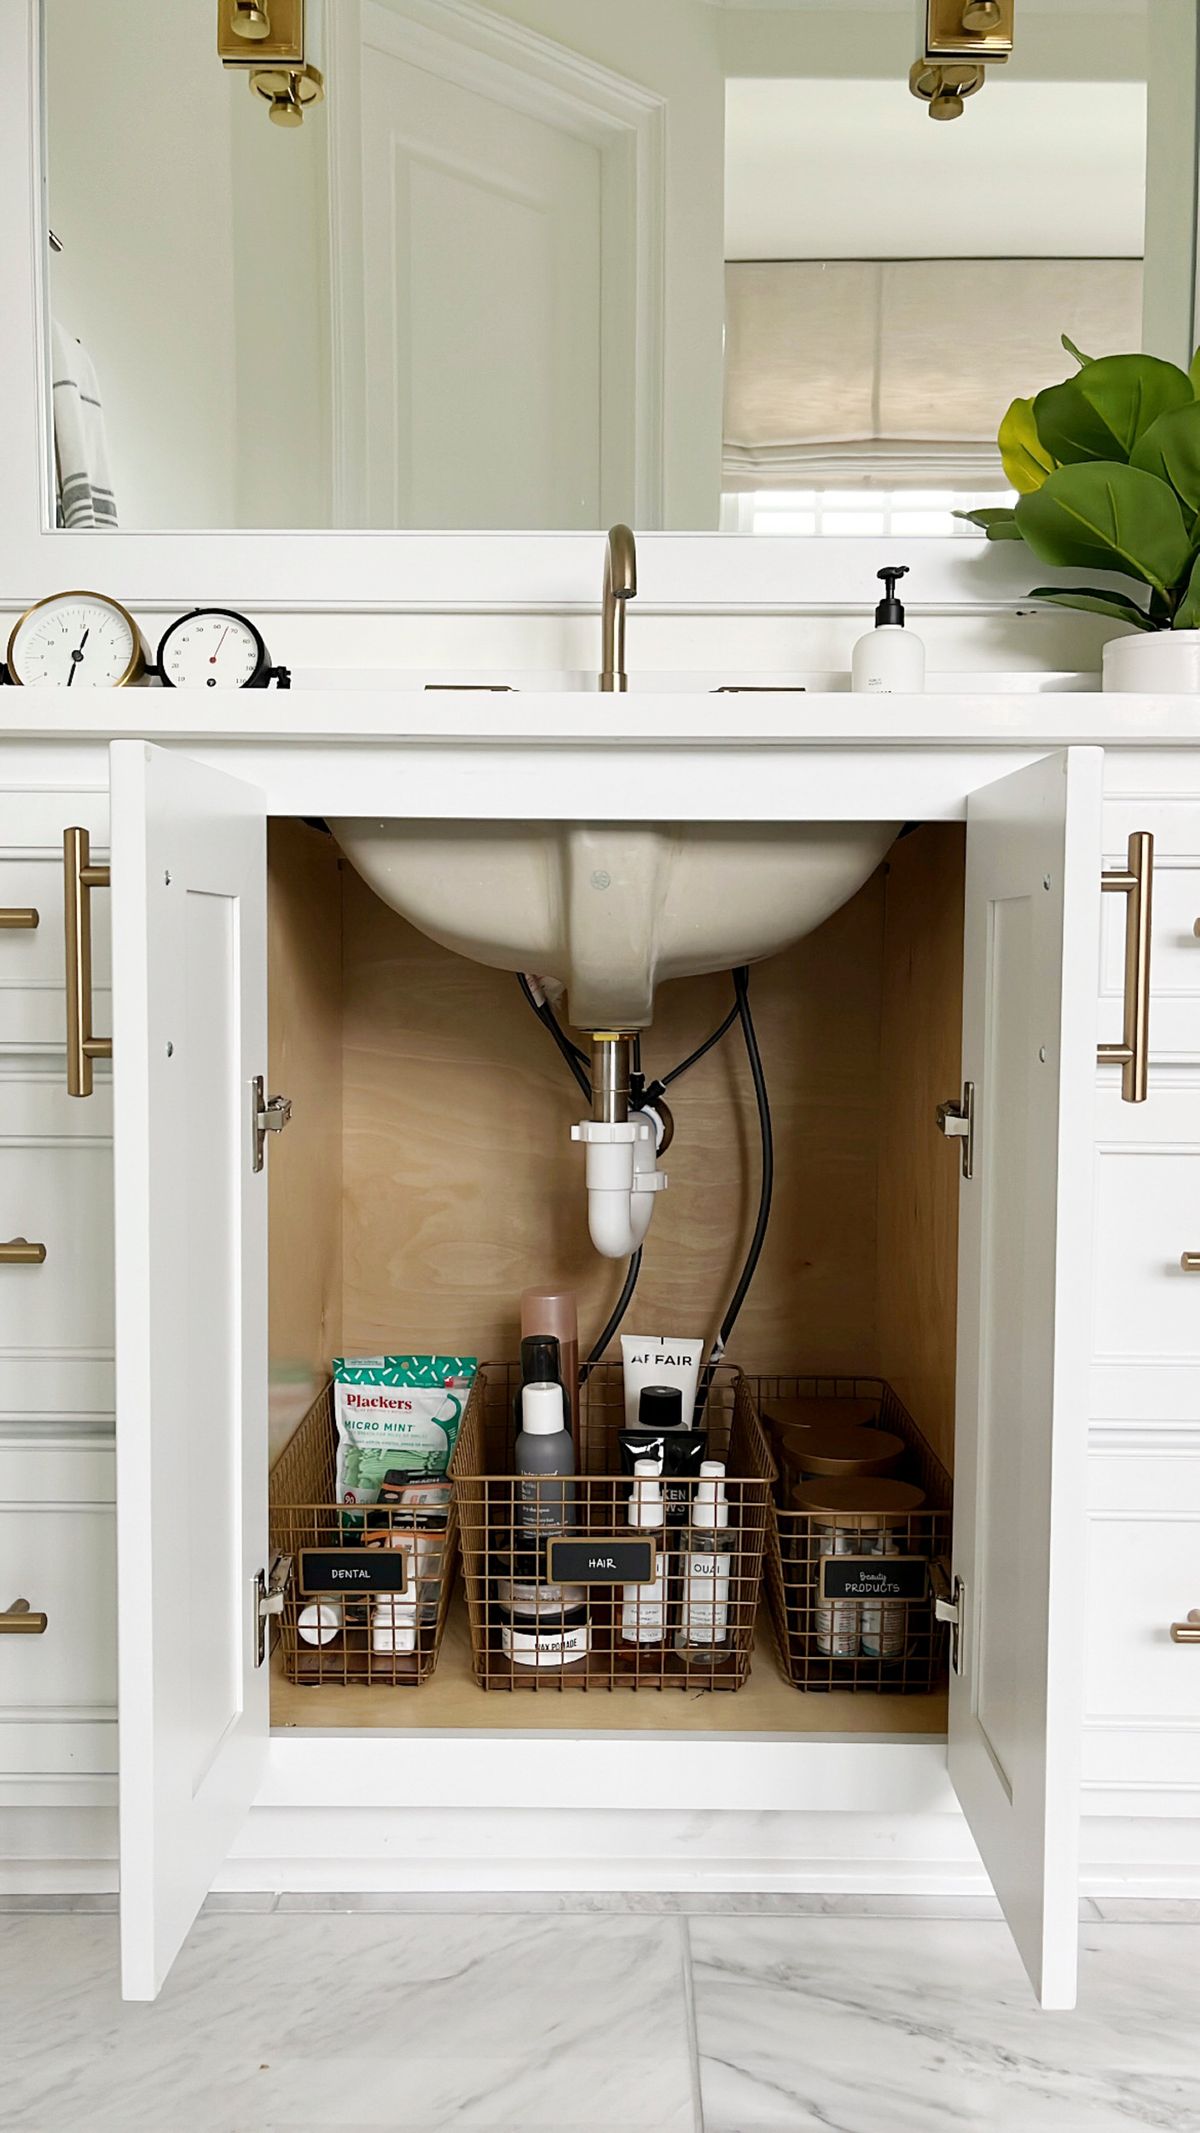 7 Handy Bathroom Organization Tips to Clear Clutter